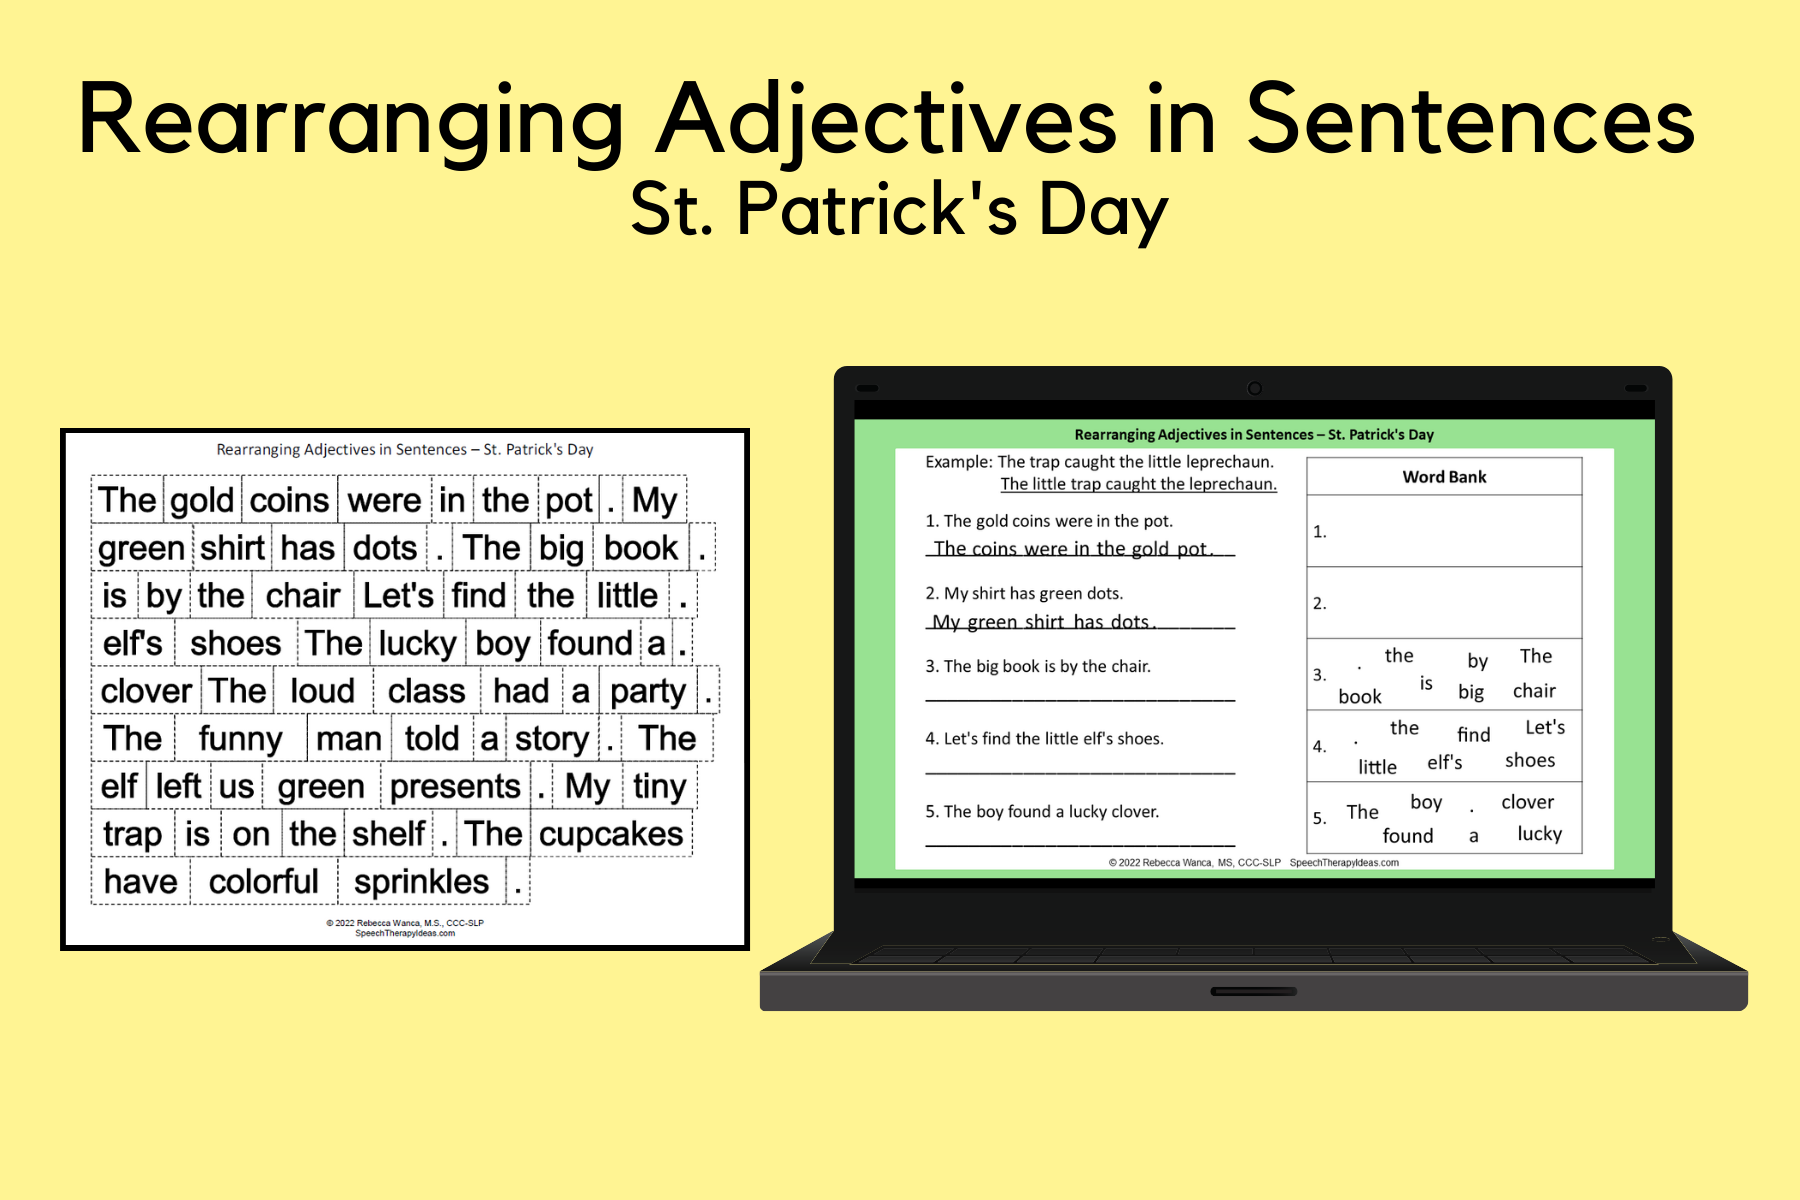 Rearranging Adjectives in Sentences – St. Patrick’s Day